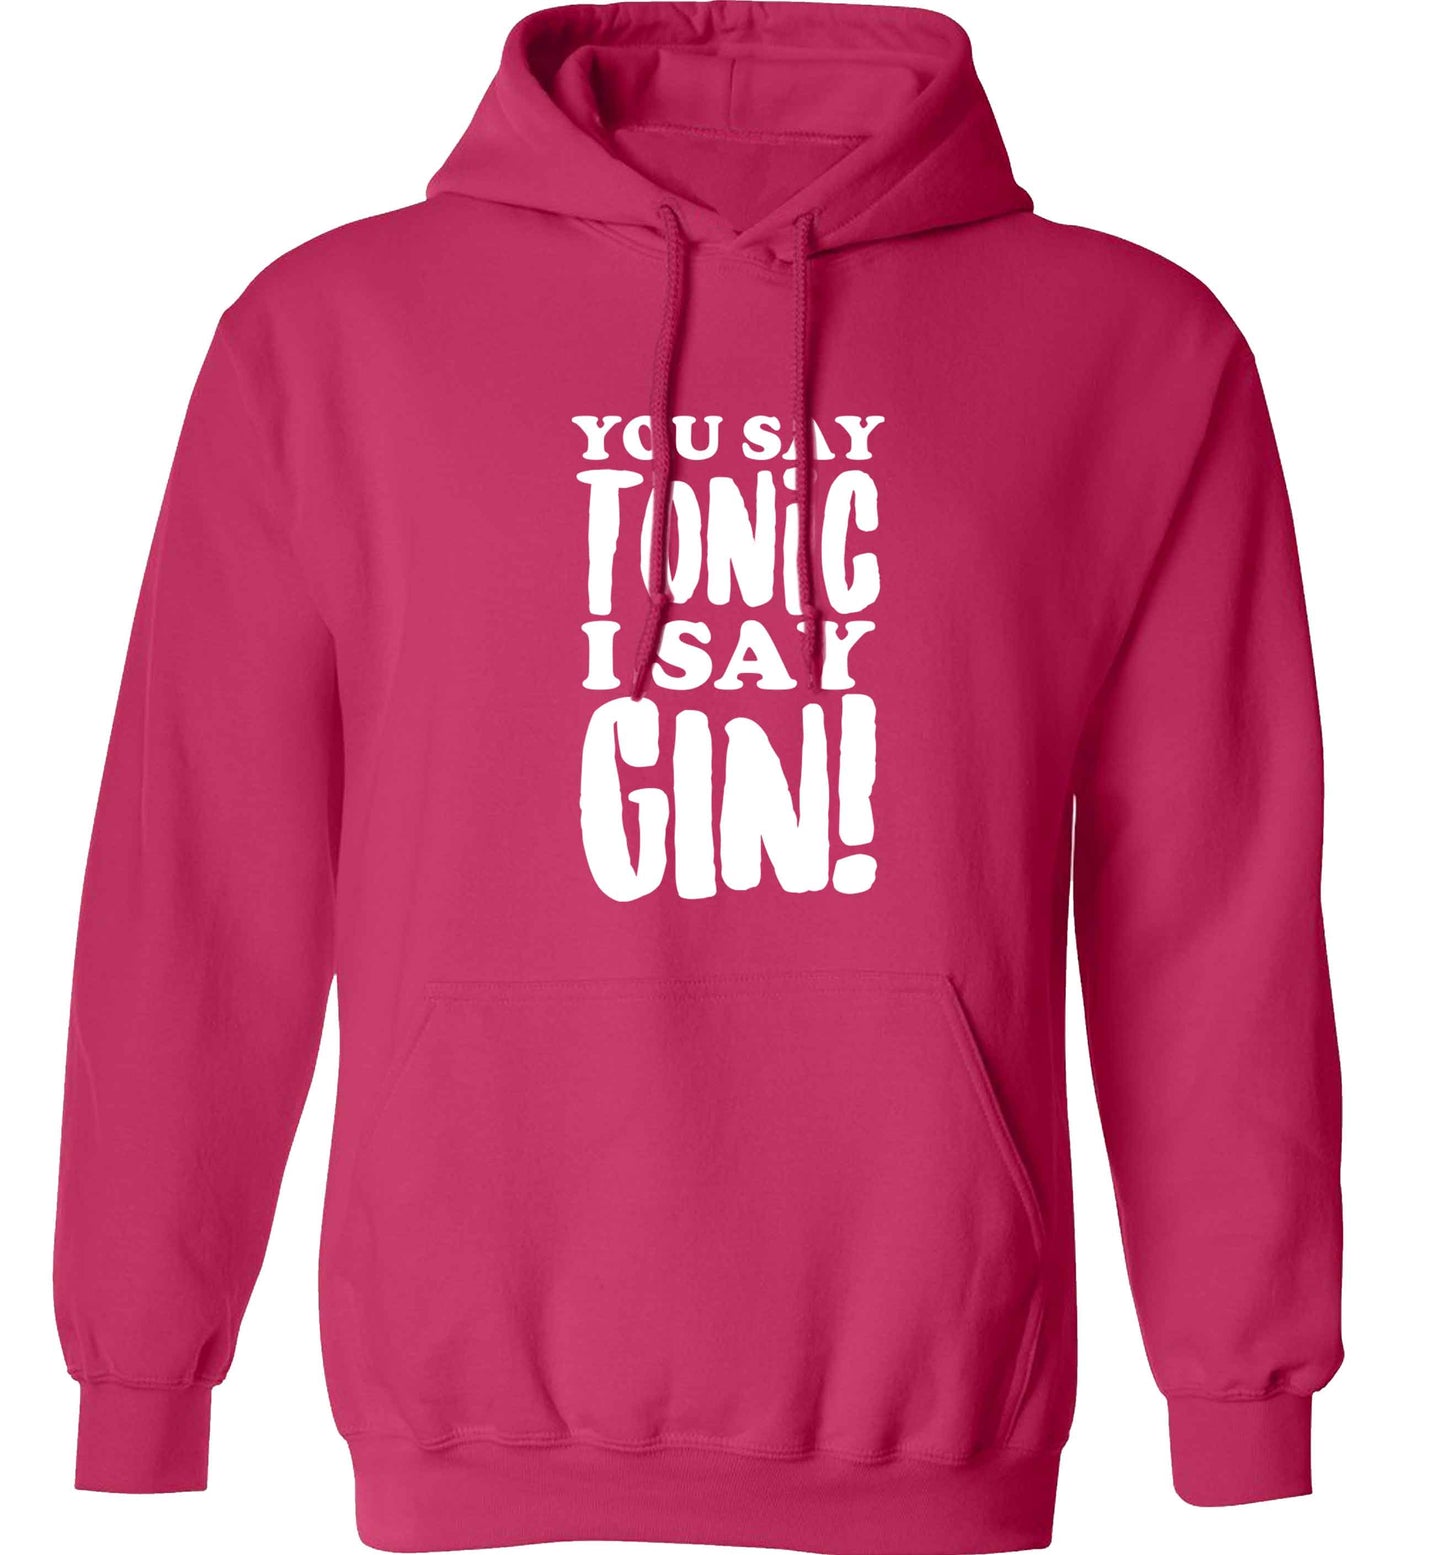 You say tonic I say gin adults unisex pink hoodie 2XL